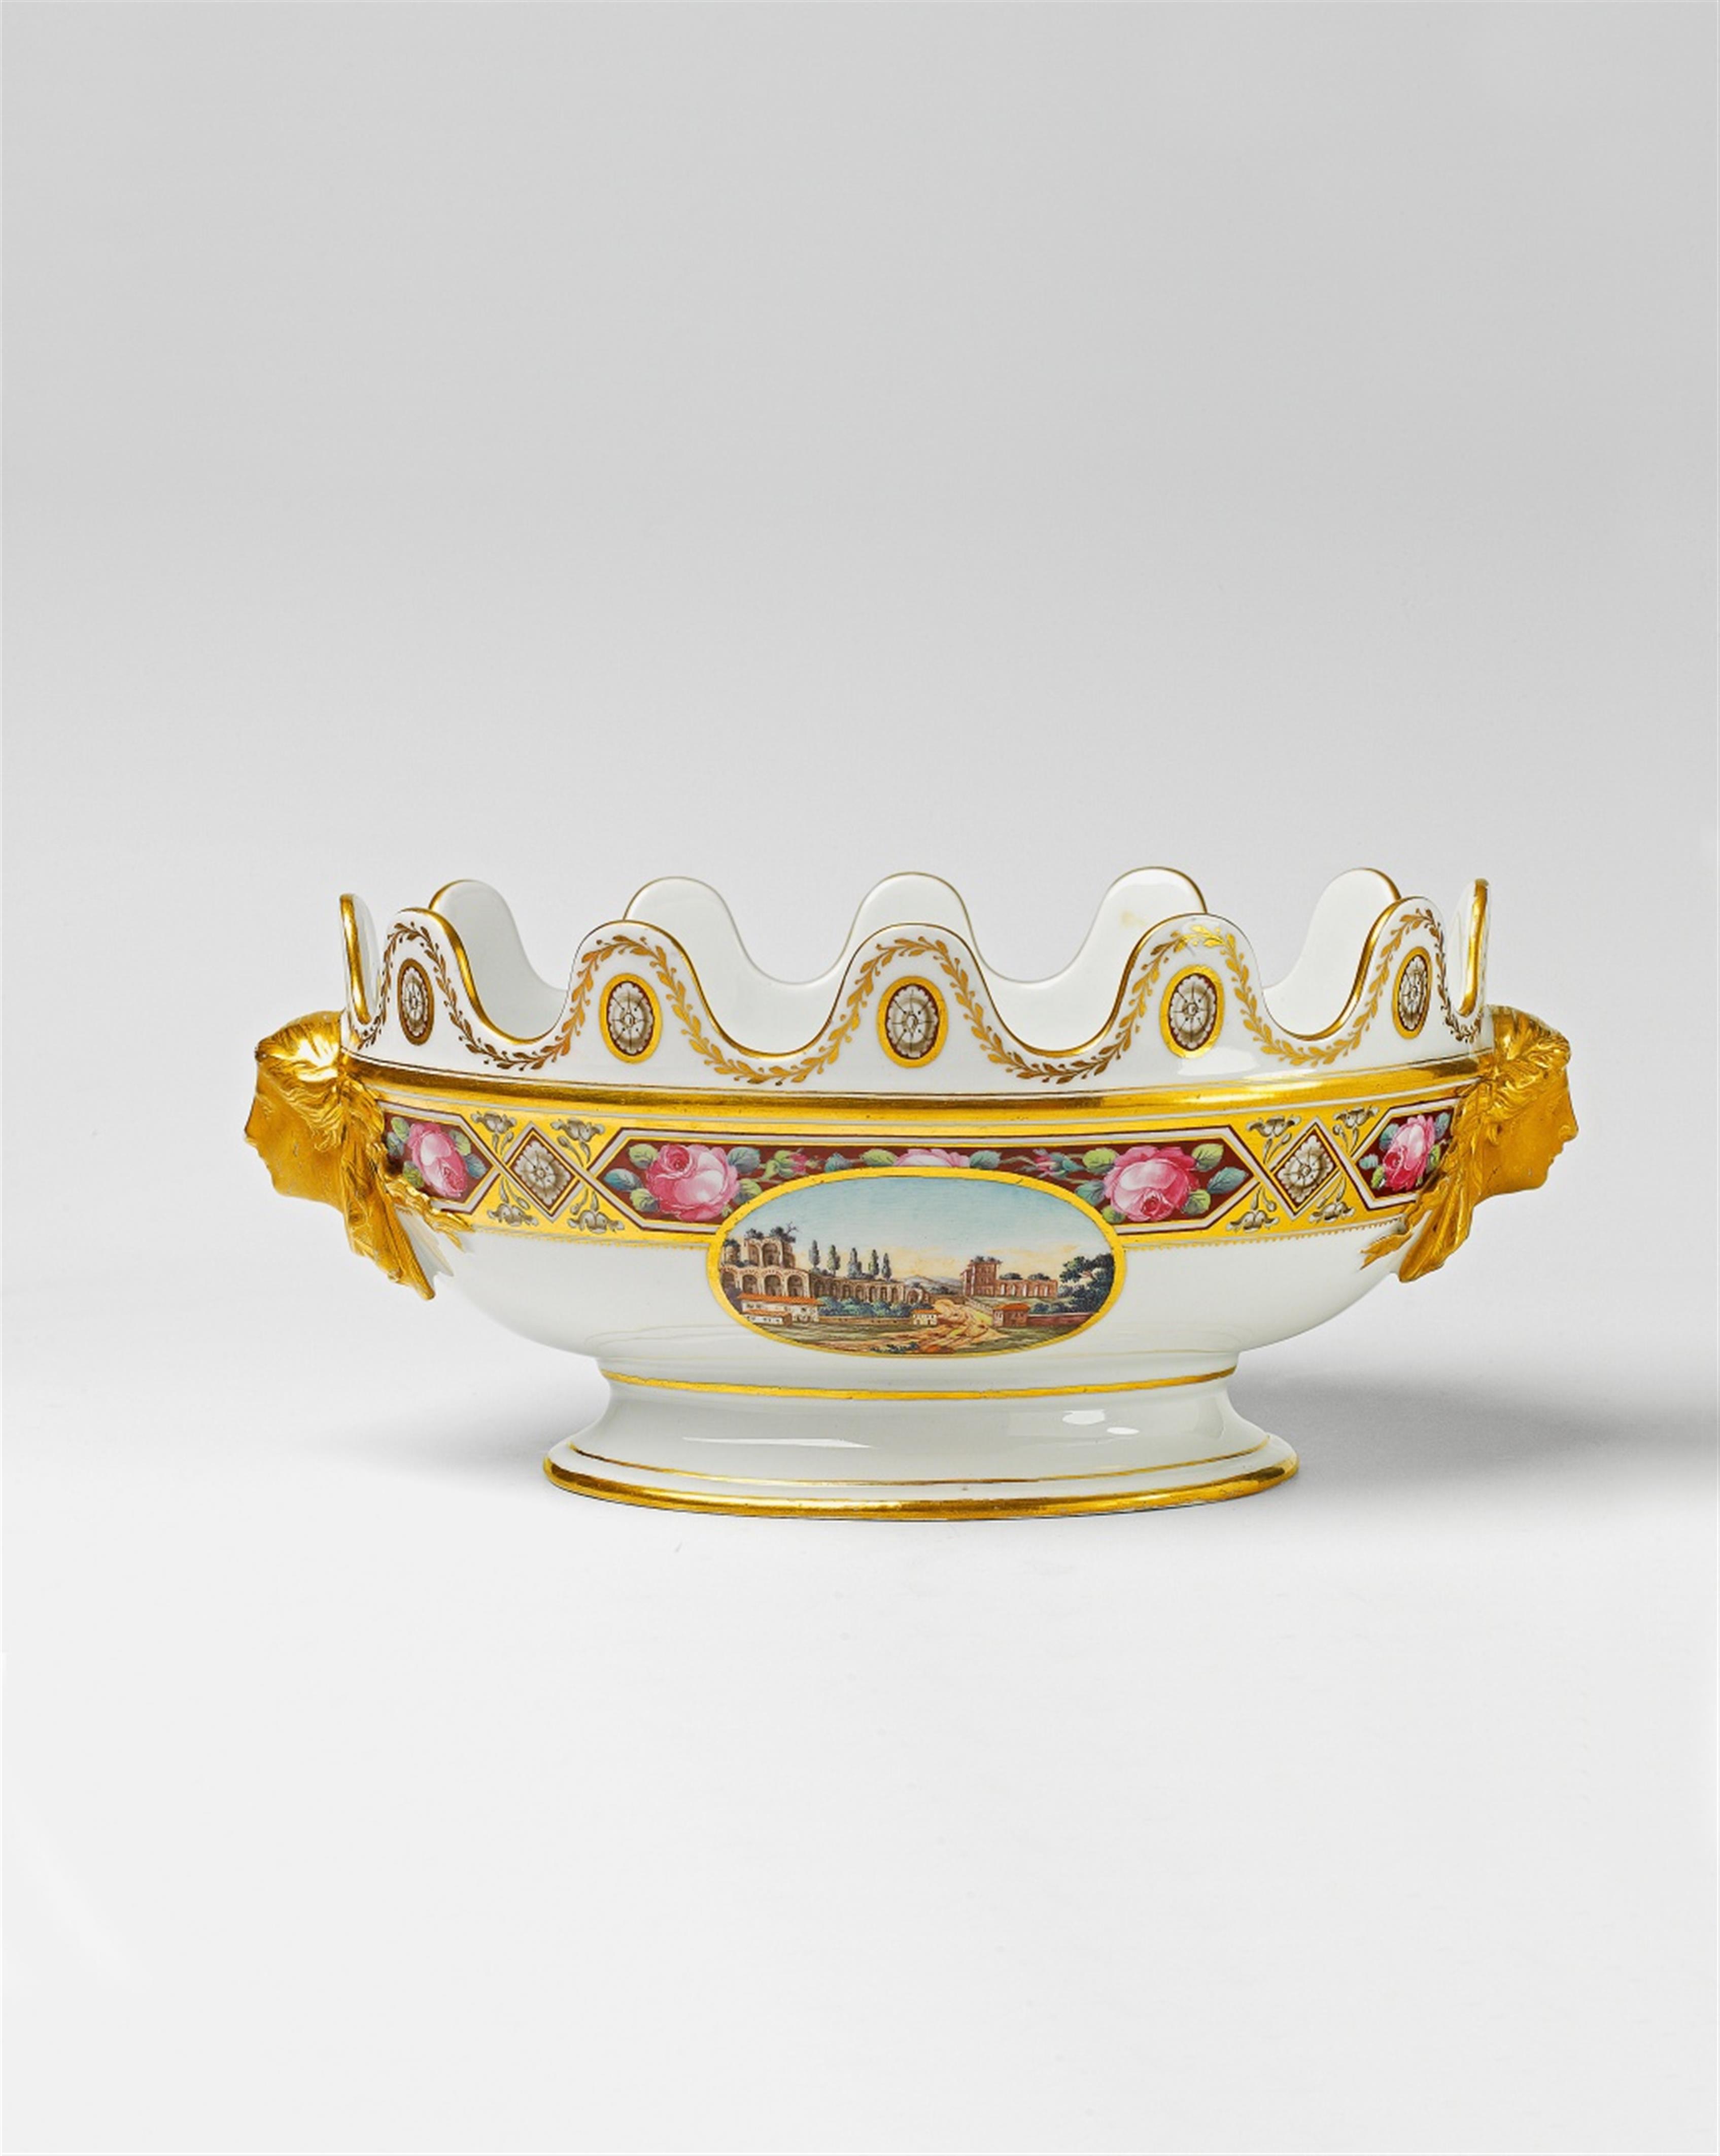 A St. Petersburg porcelain glass cooler from the wedding service of Grand Duchess Maria Pavlovna - image-1